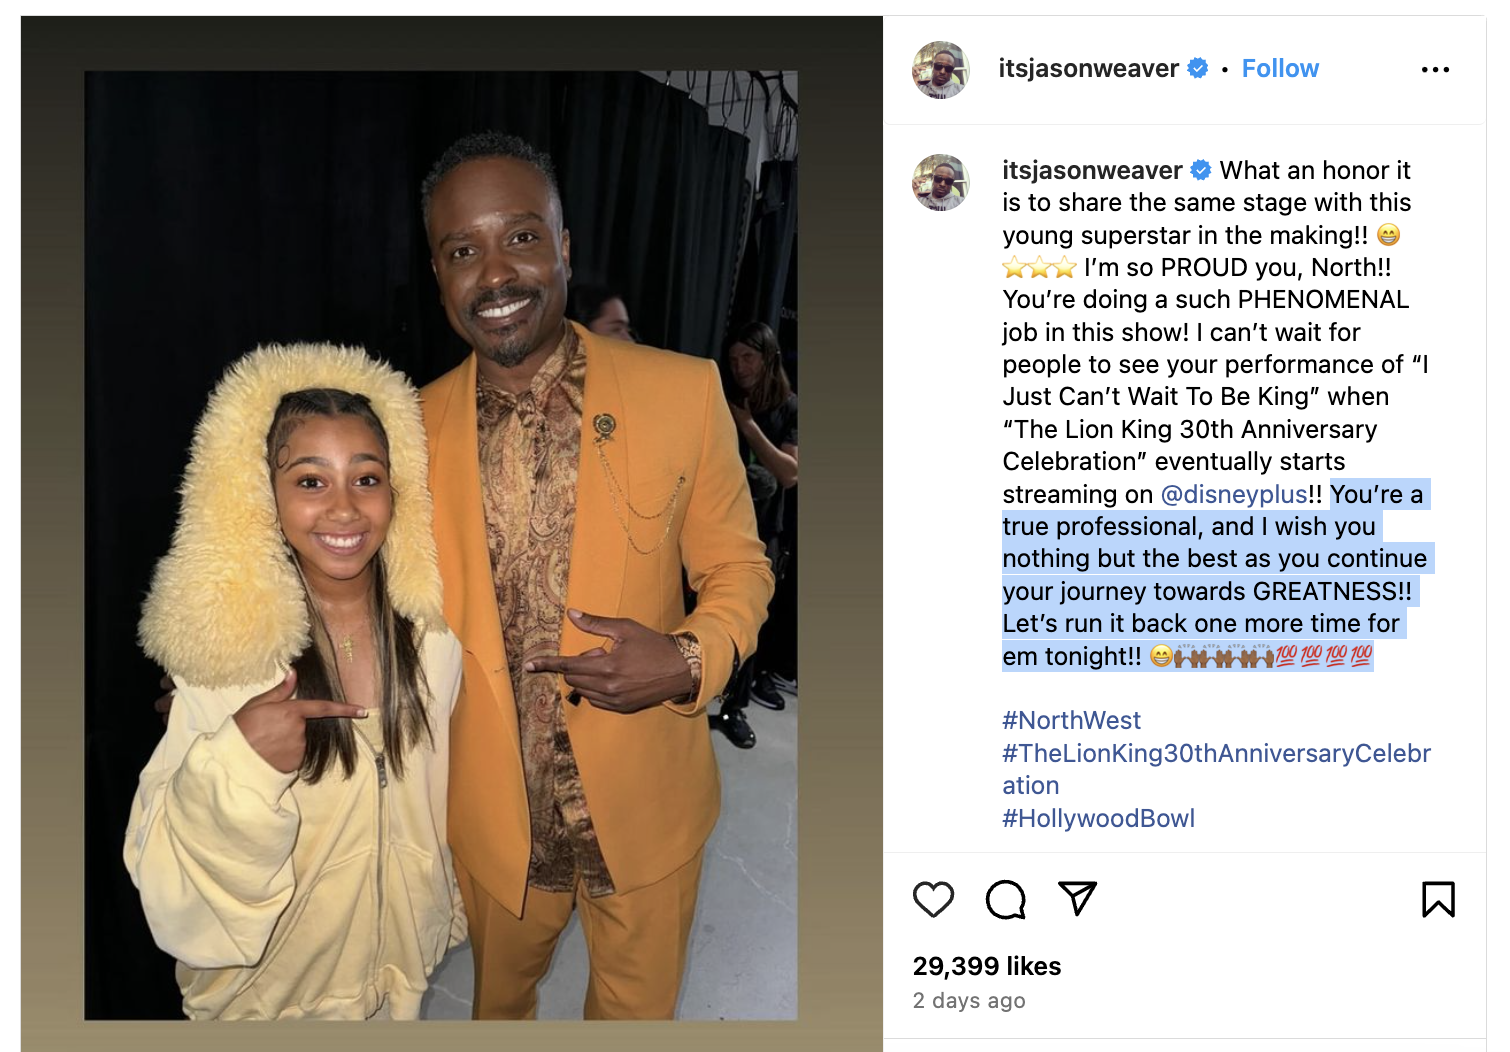 Jason Weaver and a young fan at an event; Jason is wearing a tan suit and the fan is dressed in a fuzzy jacket with animal ears. Post text celebrates their performance